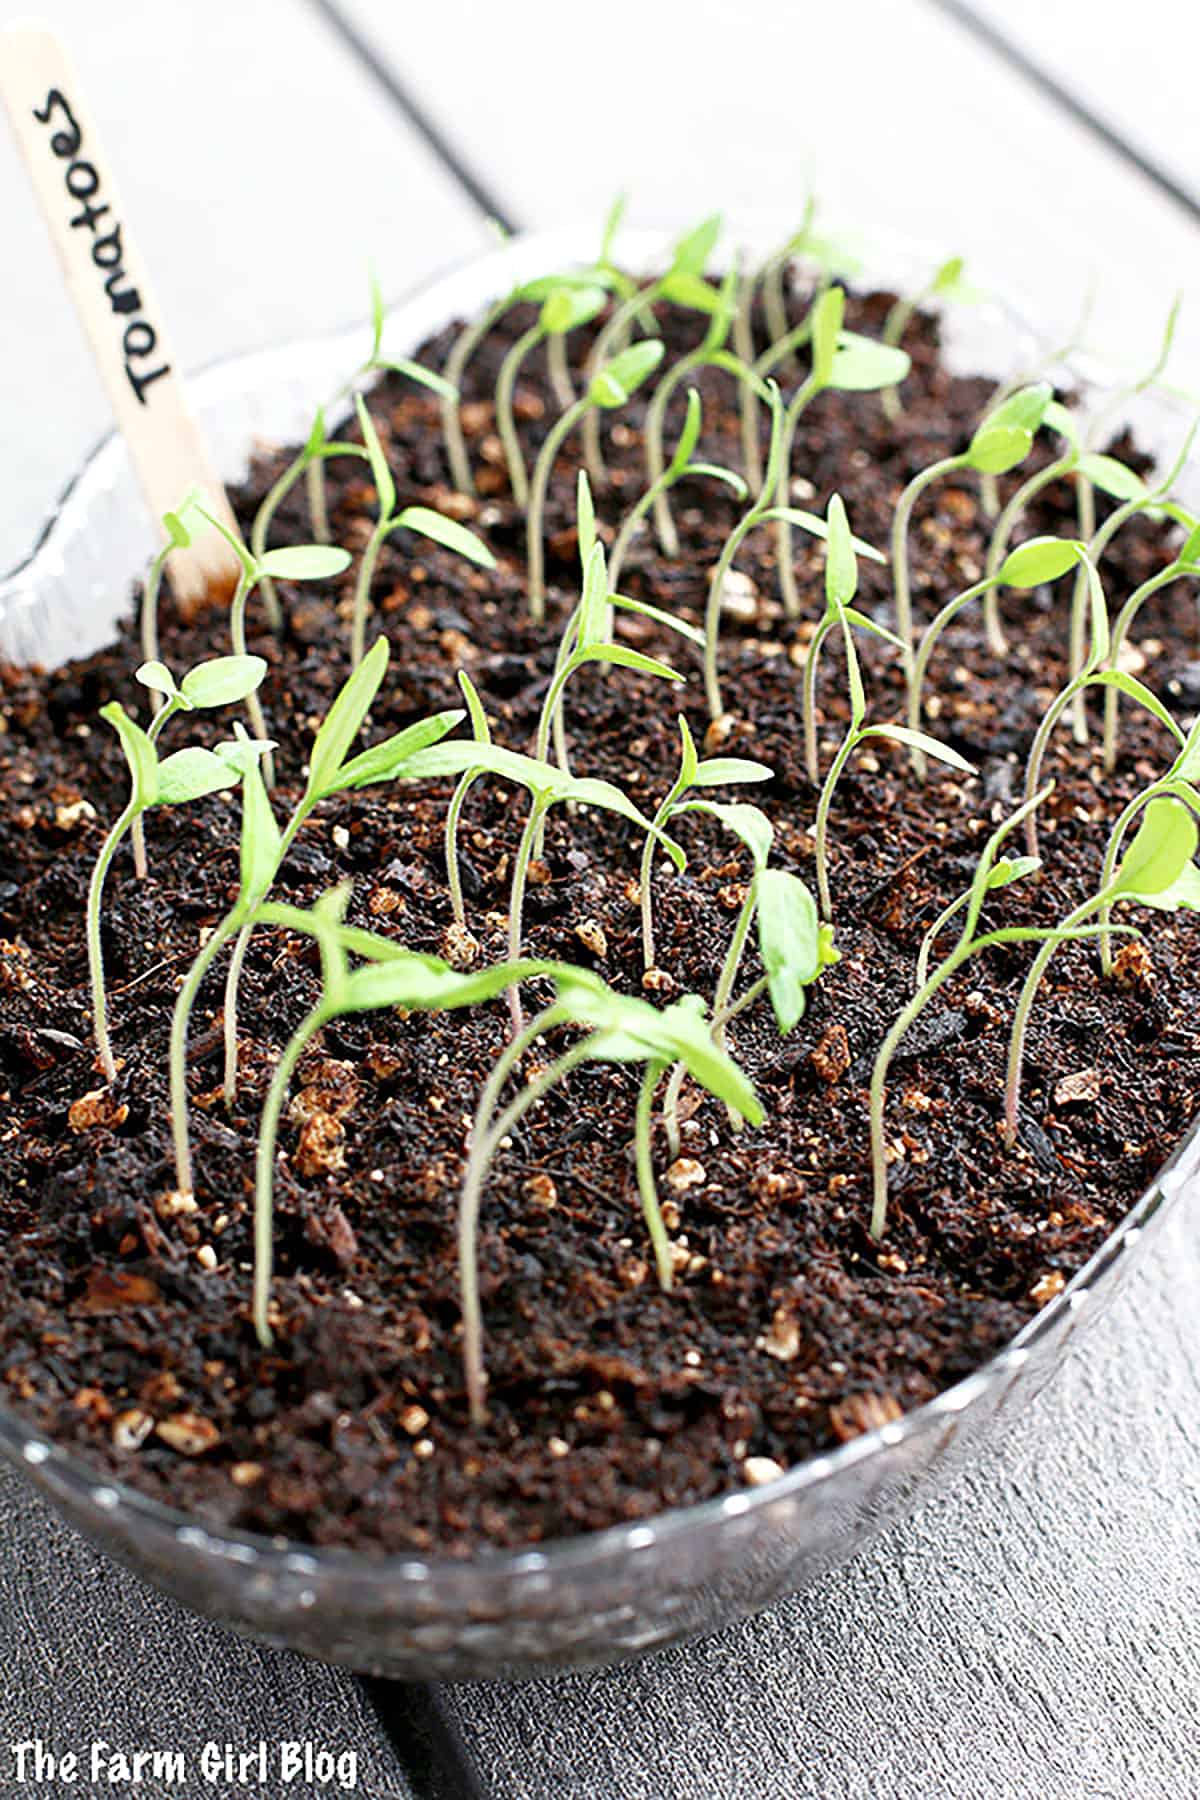 Tomato plants are one of the easiest vegetables to start growing indoors from seeds. 